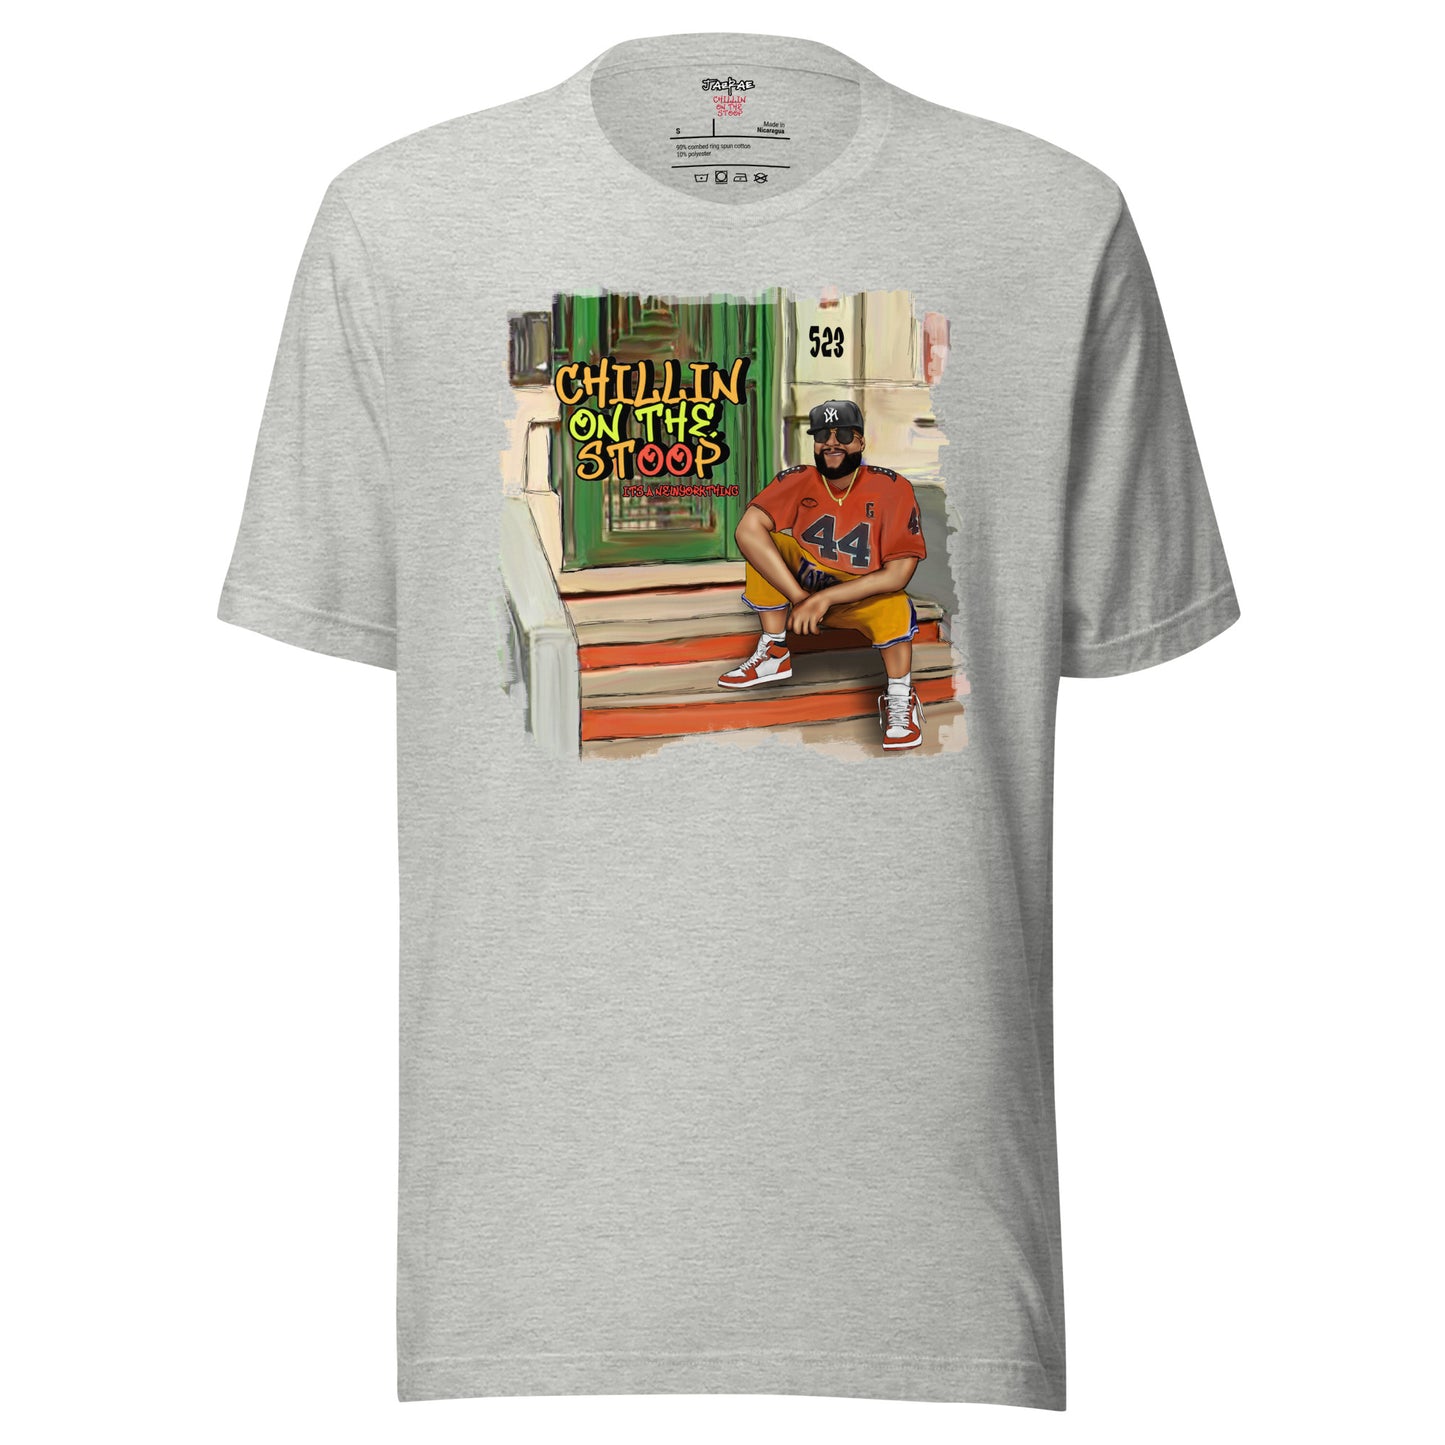 #44 CHILLIN ON THE STOOP Special Limited-Edition t-shirt